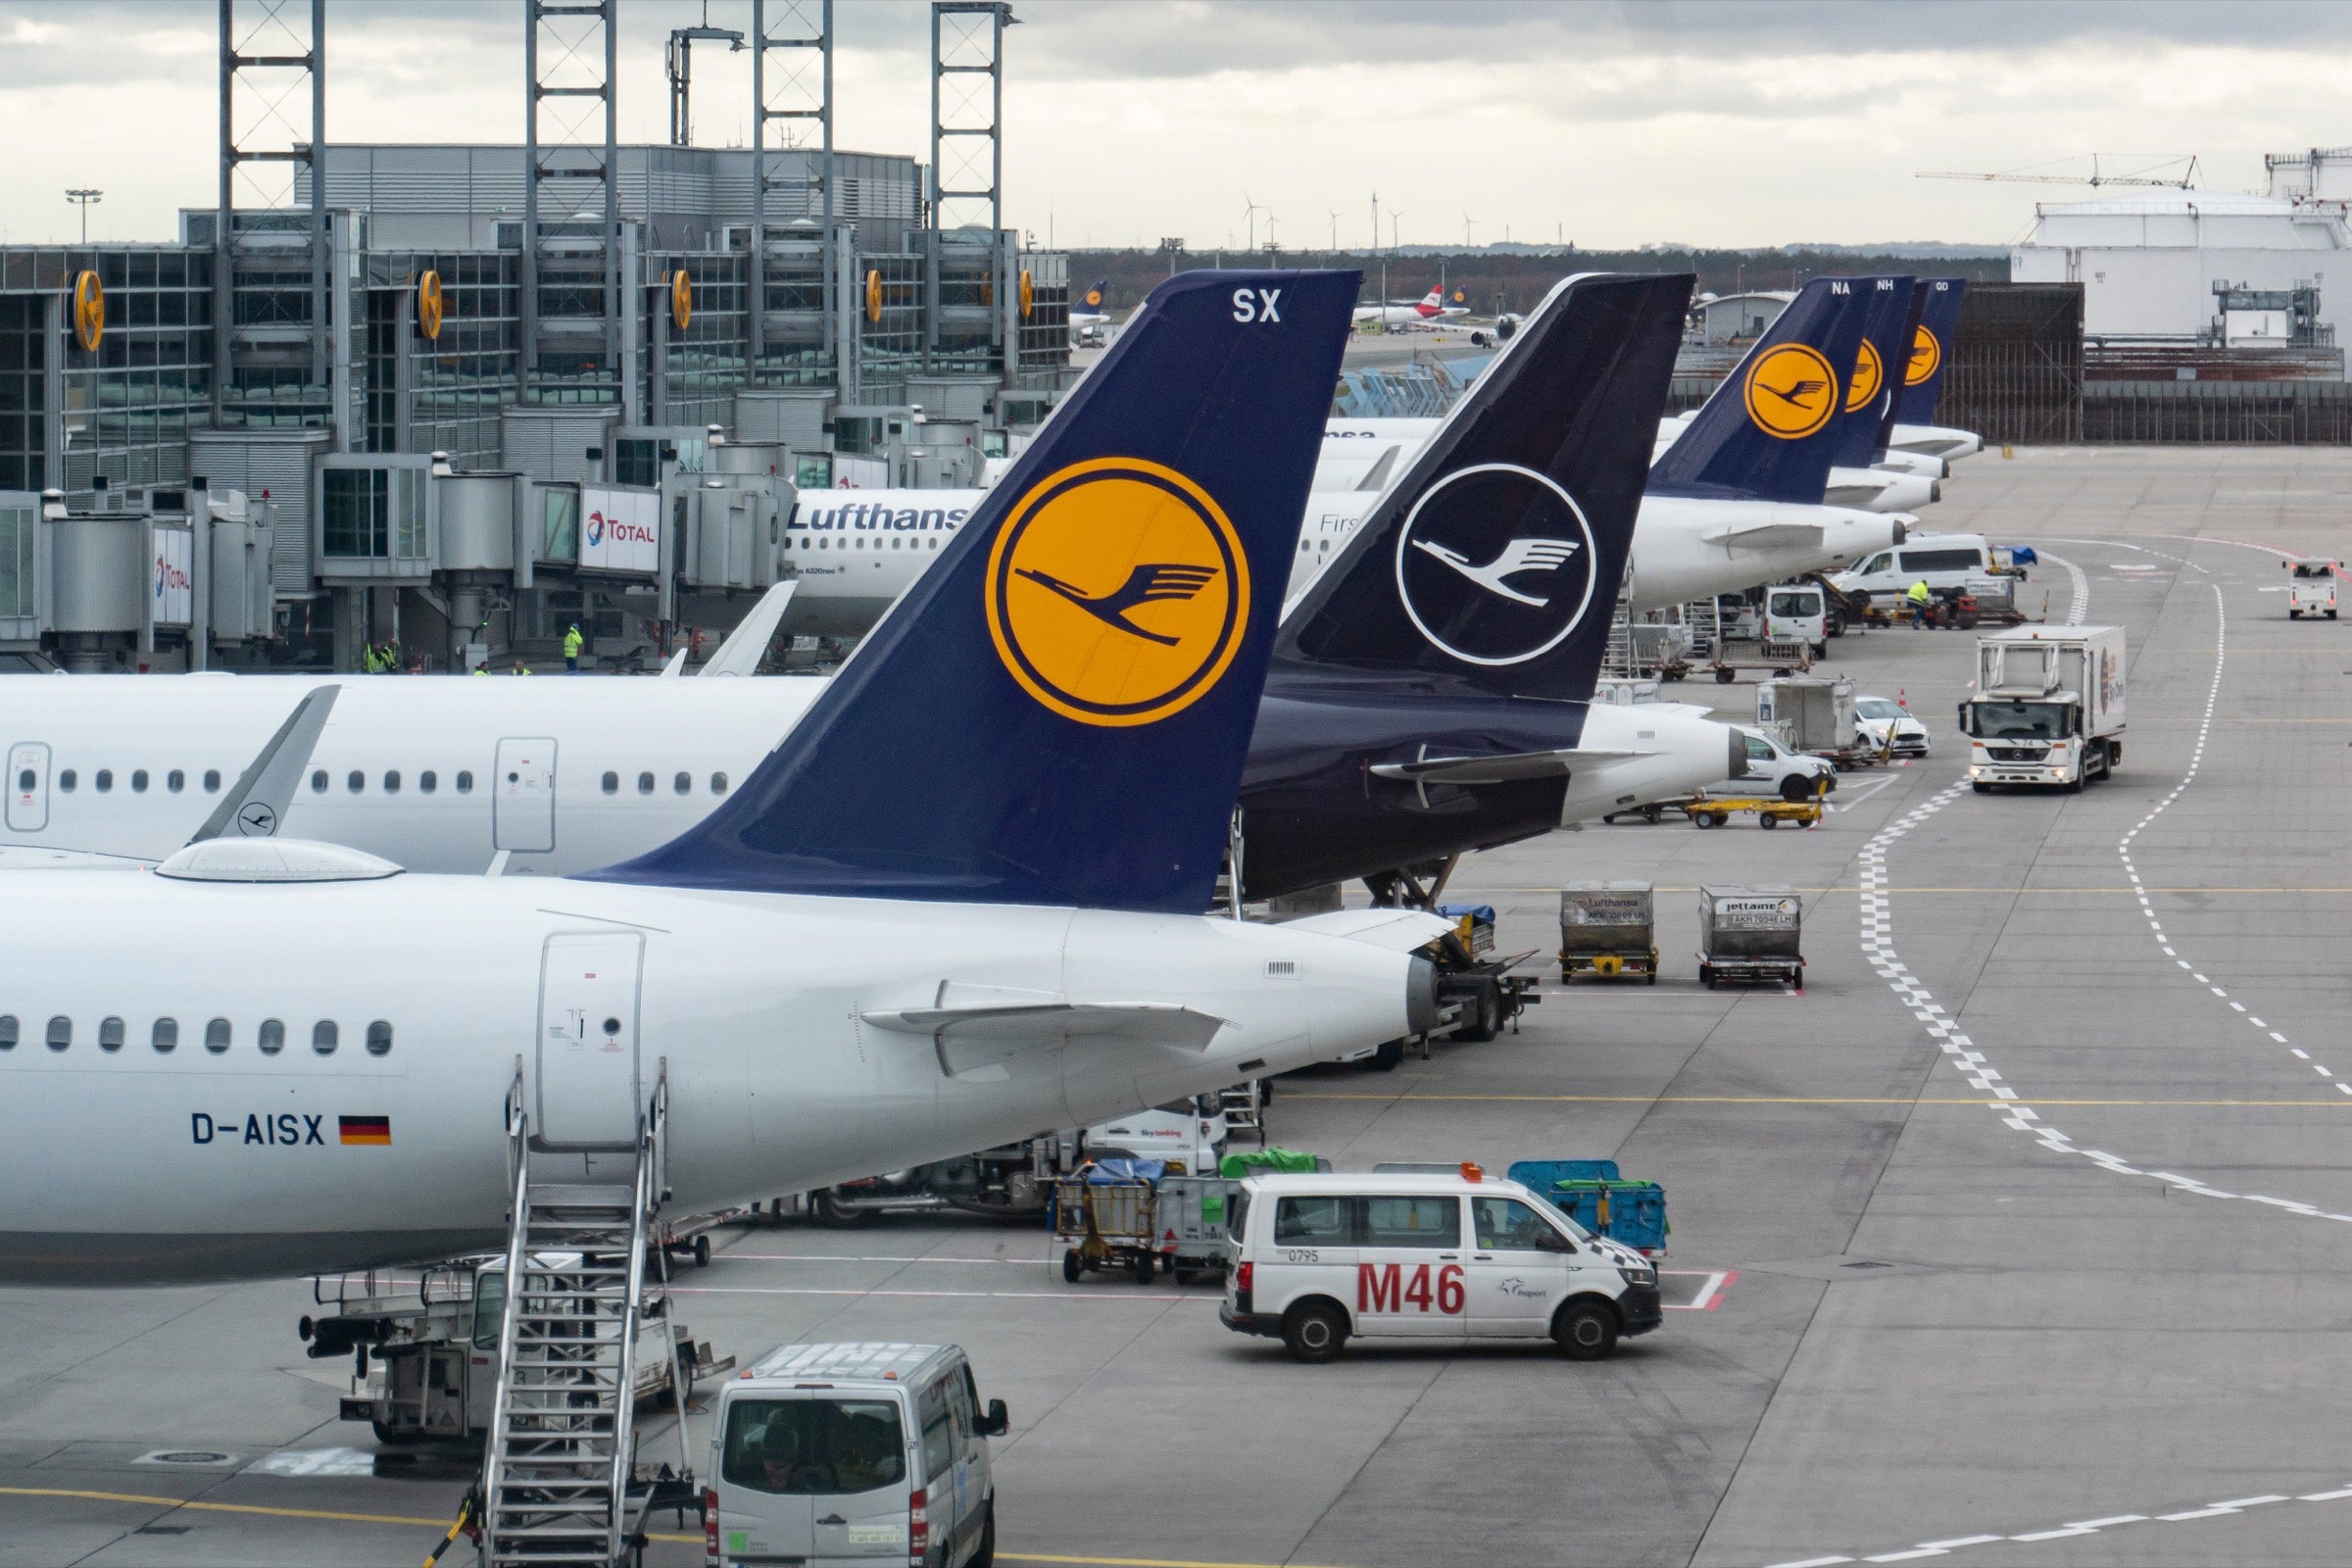 Lufthansa planes at the gate in Frankfurt Airport